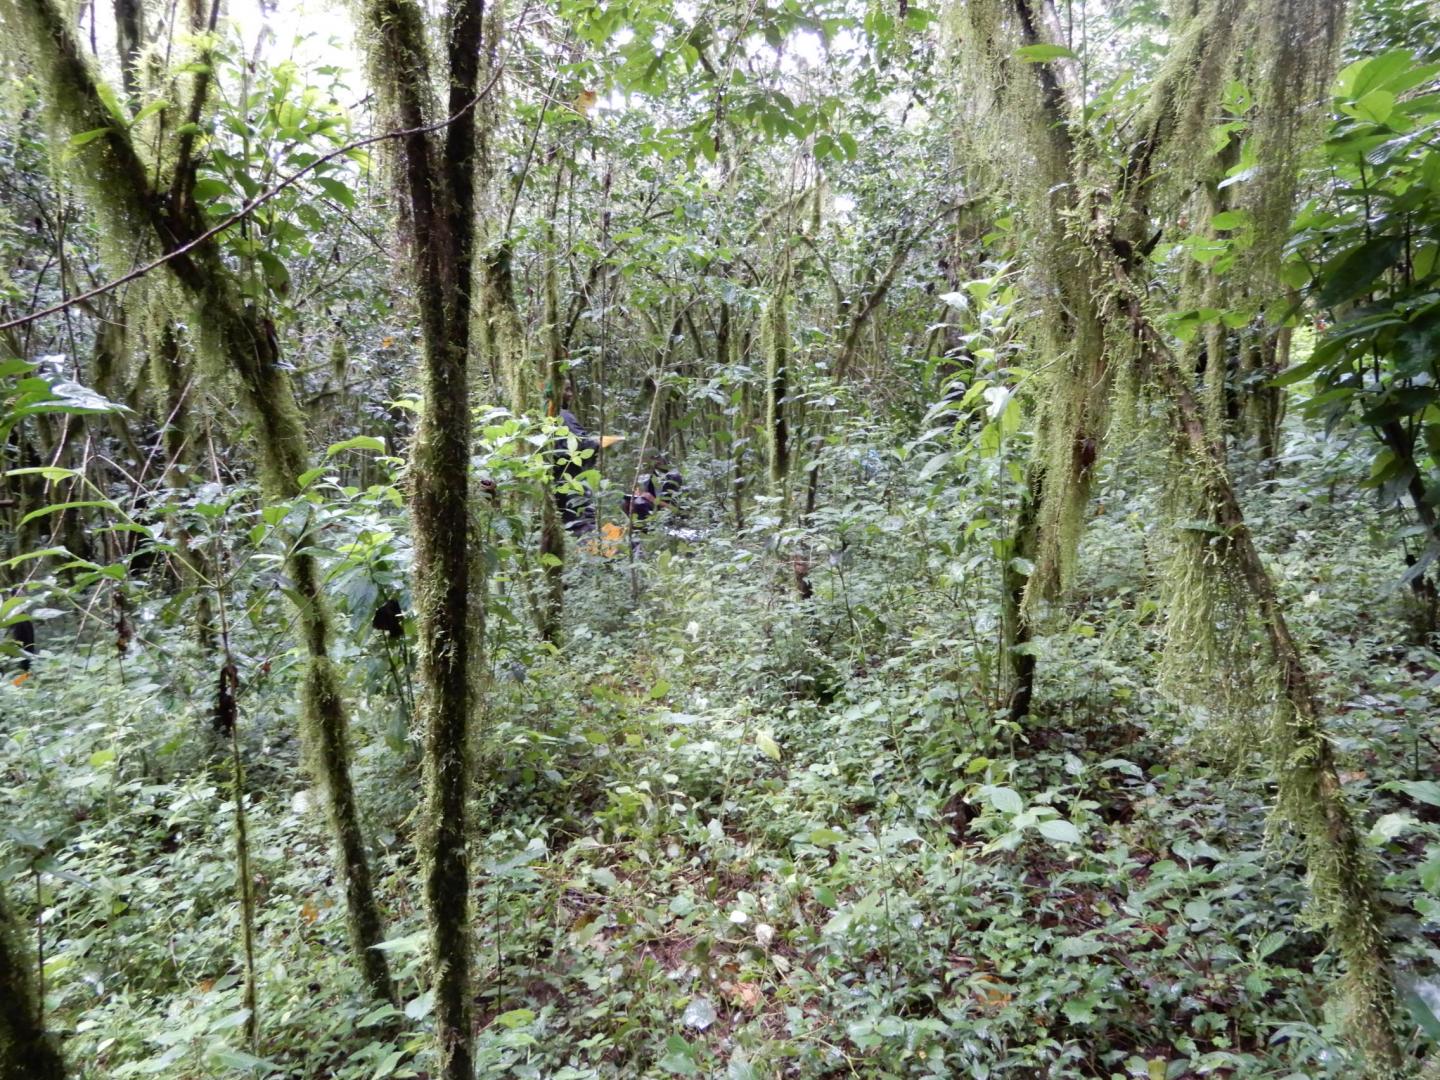 Coffee shrubs in the forest systems